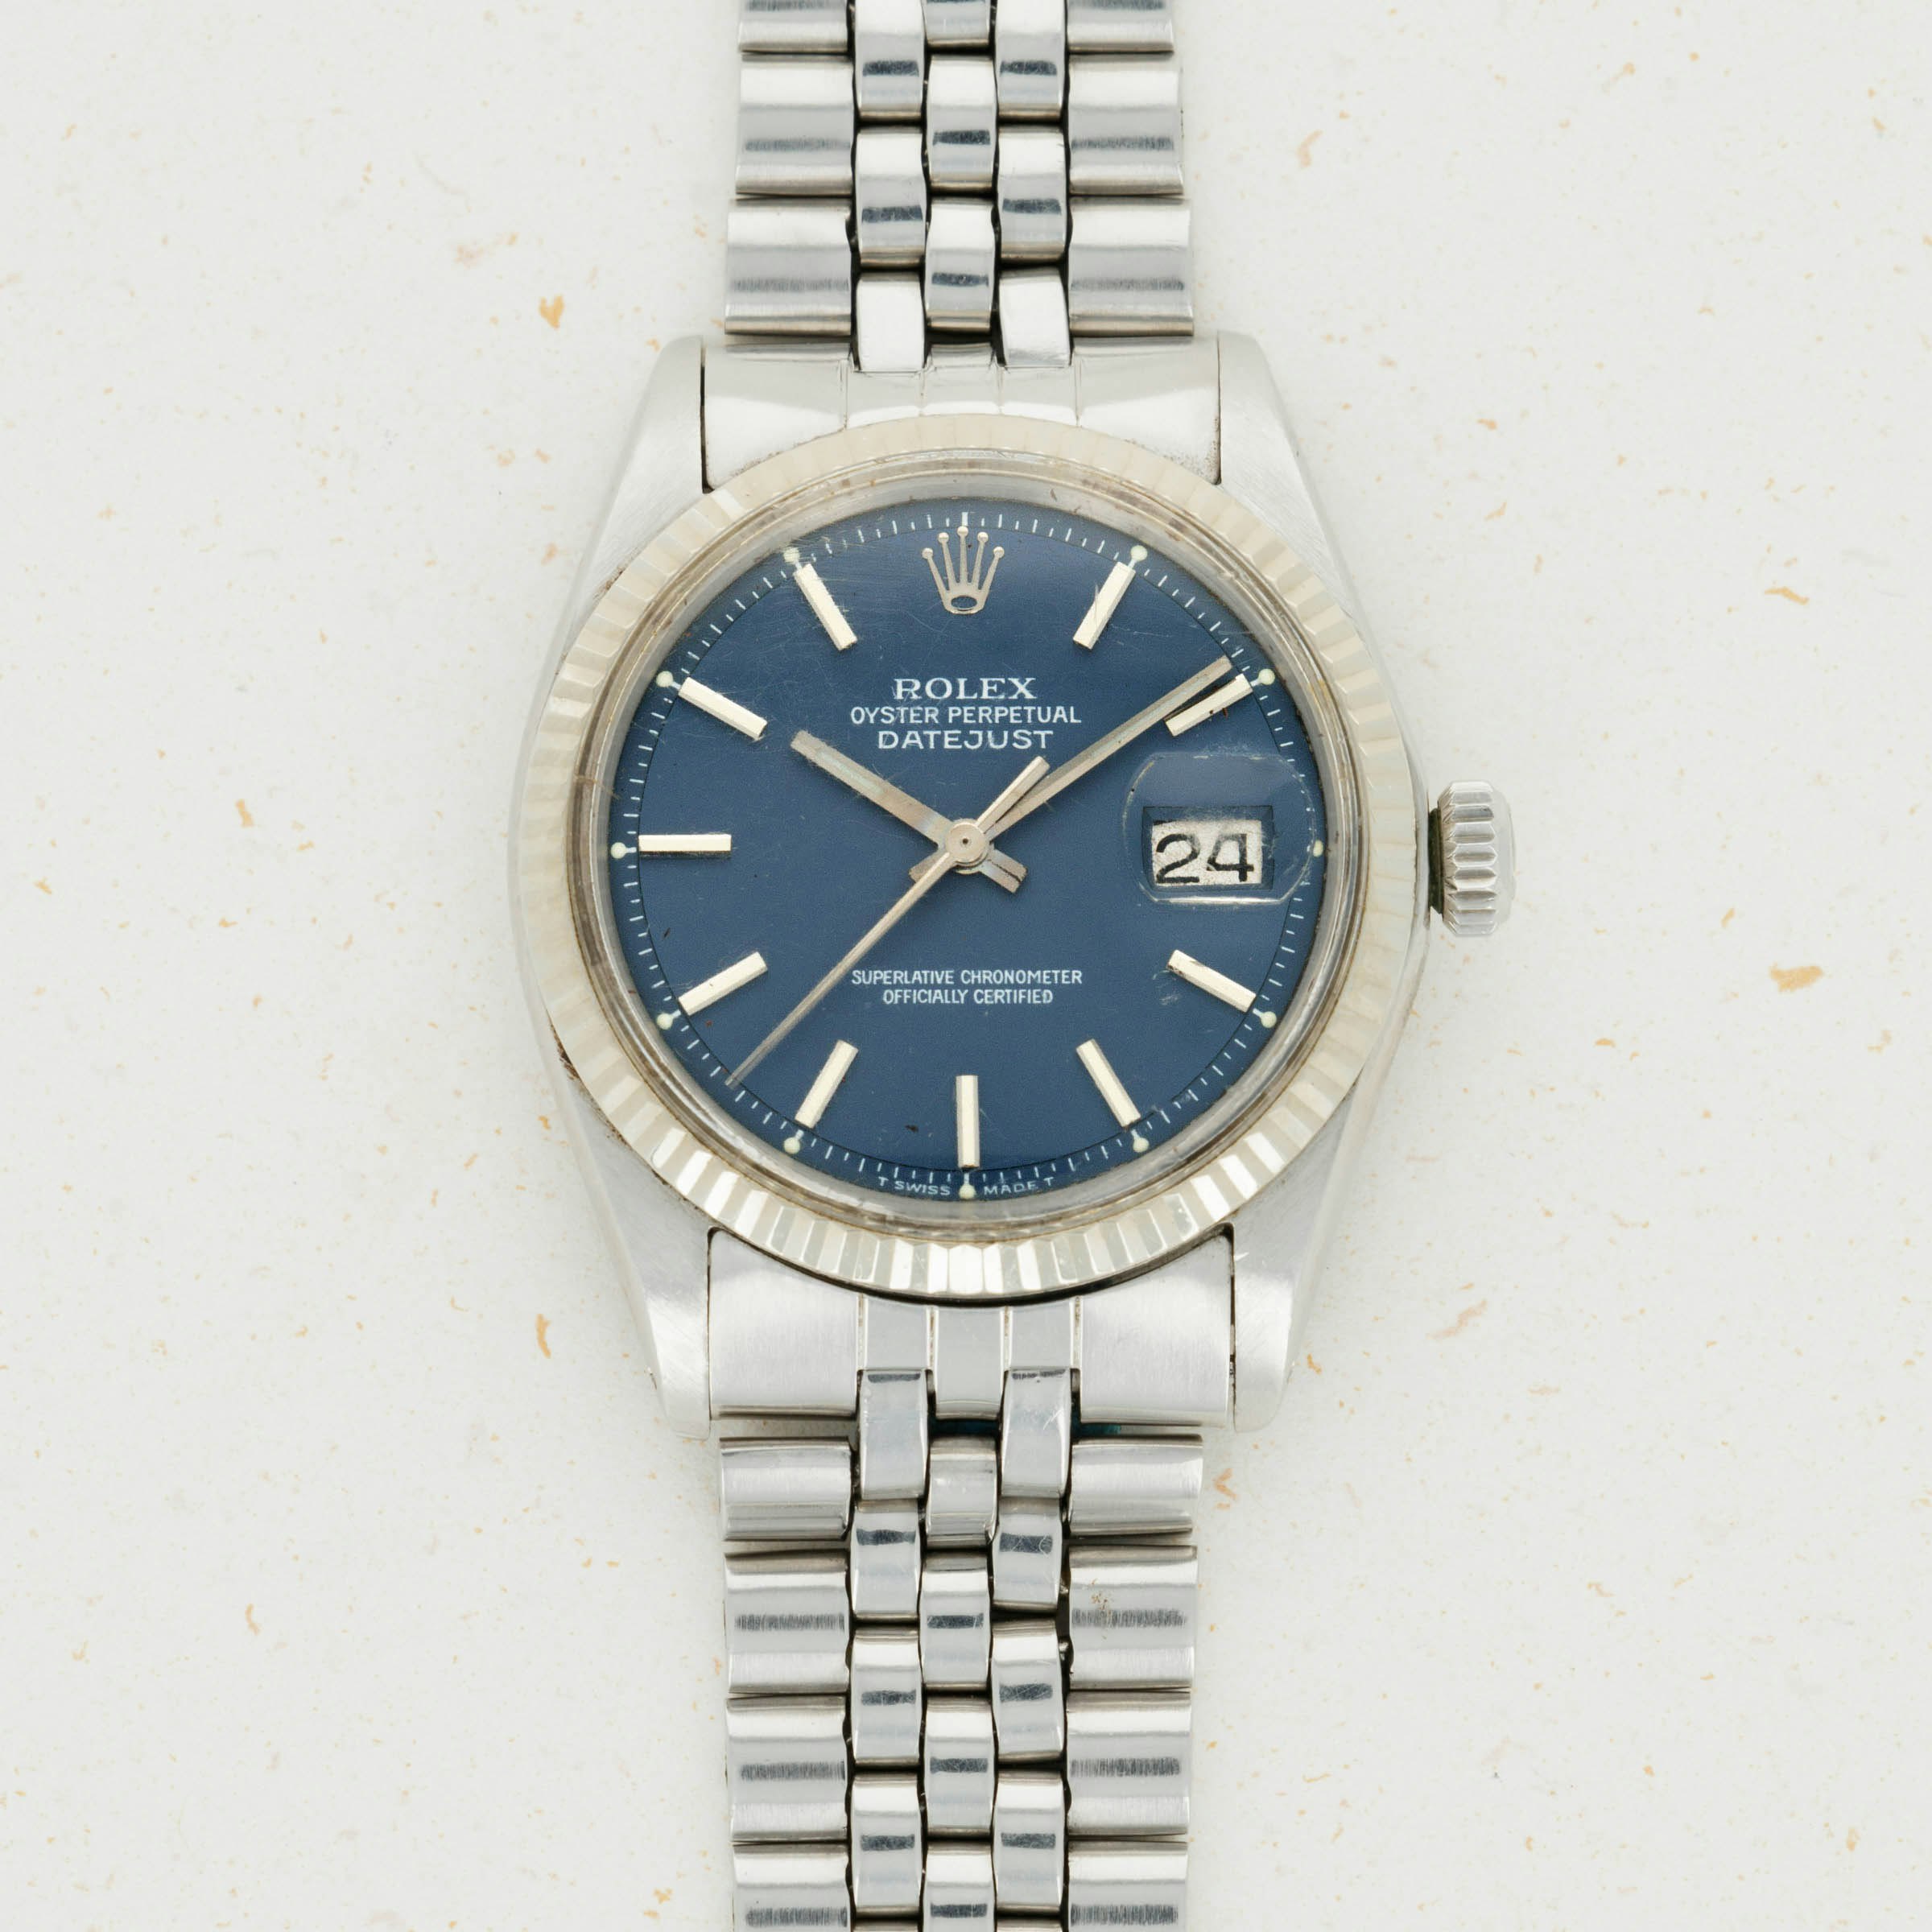 Thumbnail for Rolex Datejust 1601 Blue Dial